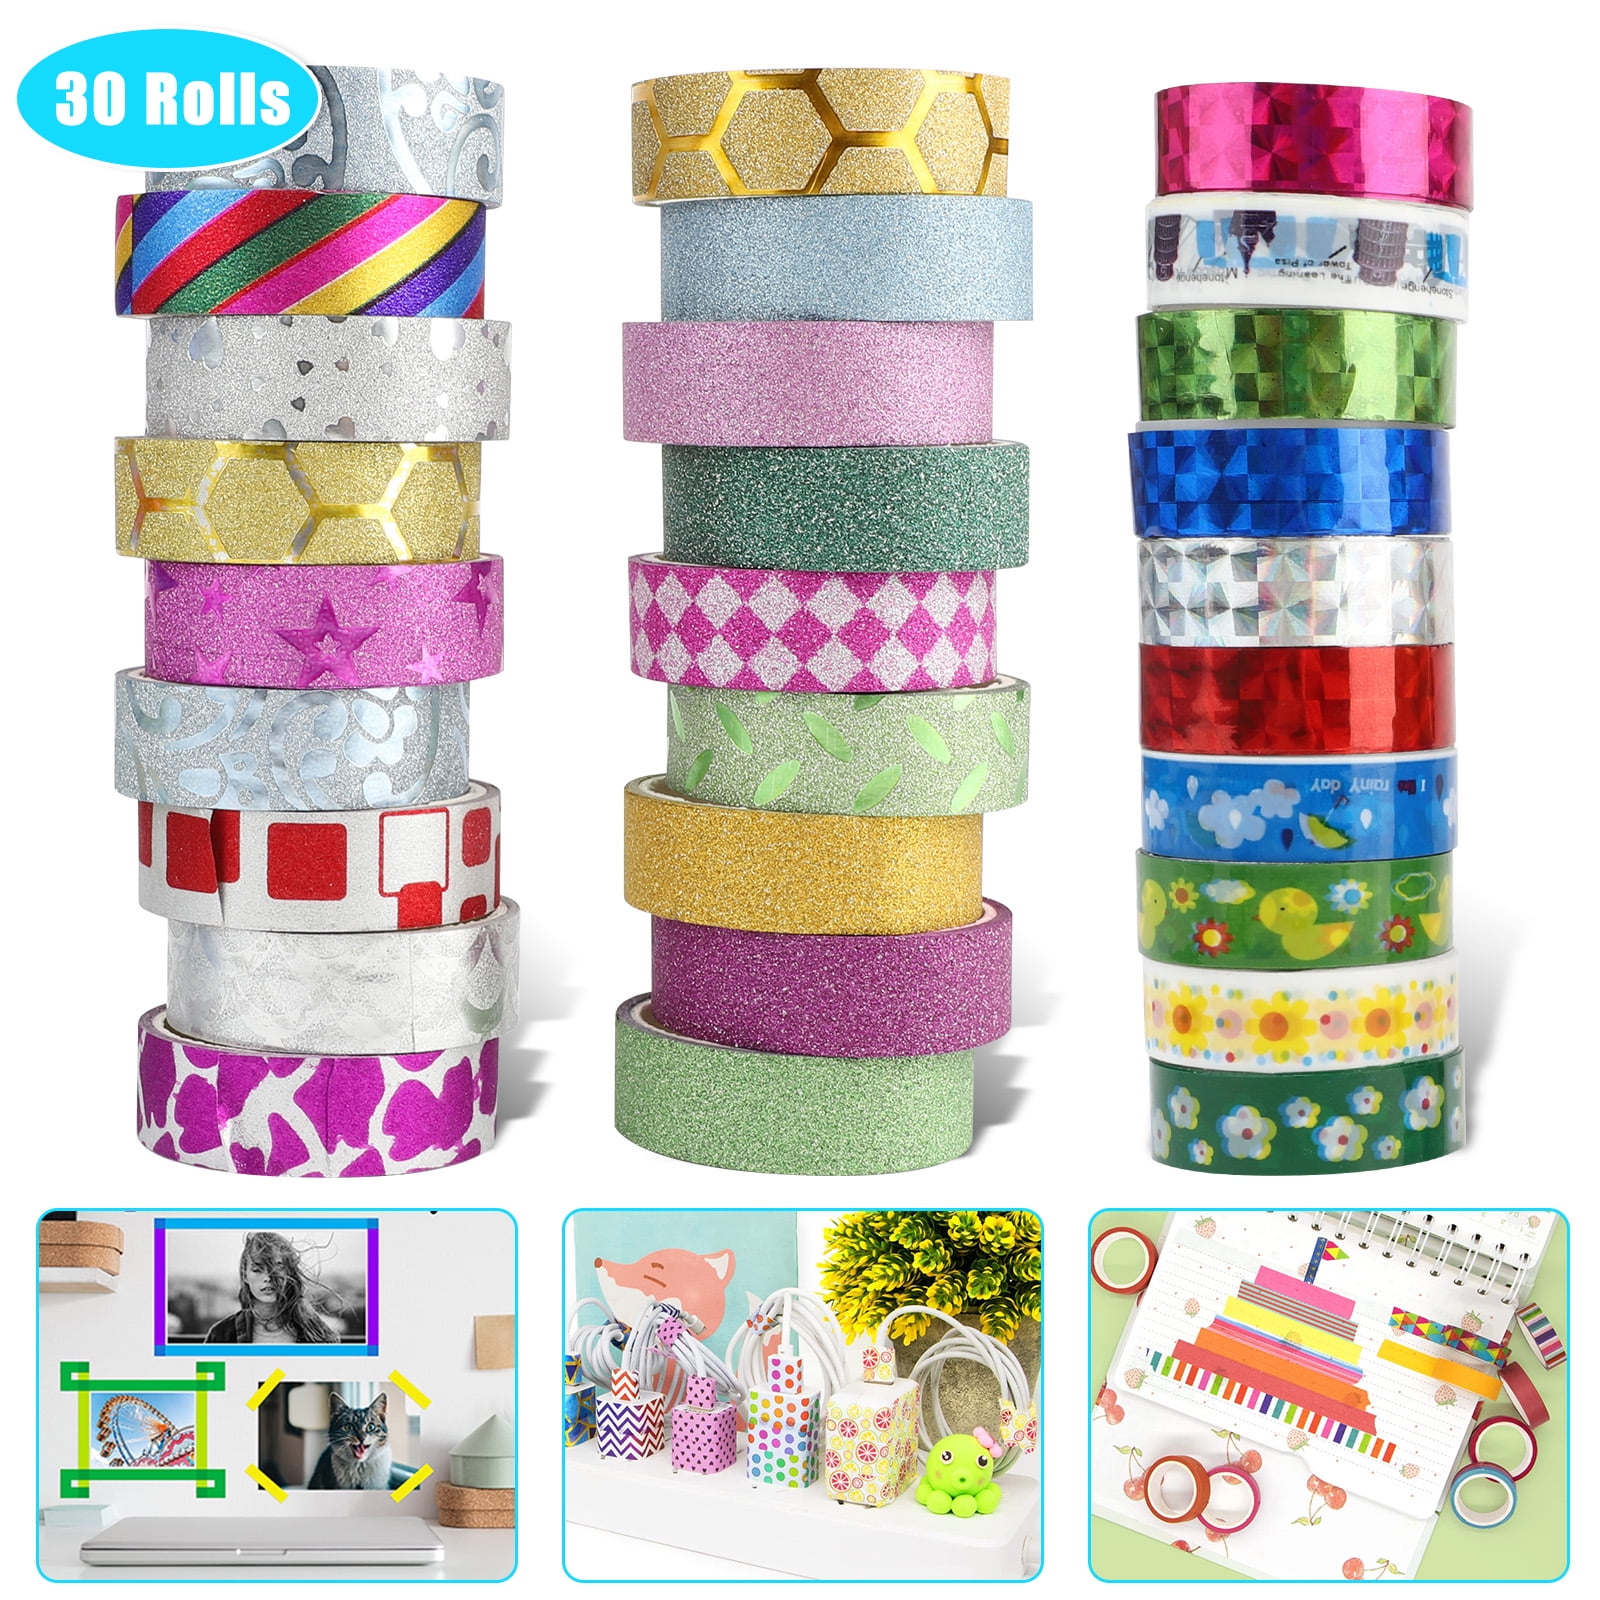 Washi Tape Crafts - 45 Easy DIY Ideas With Washi Tapes